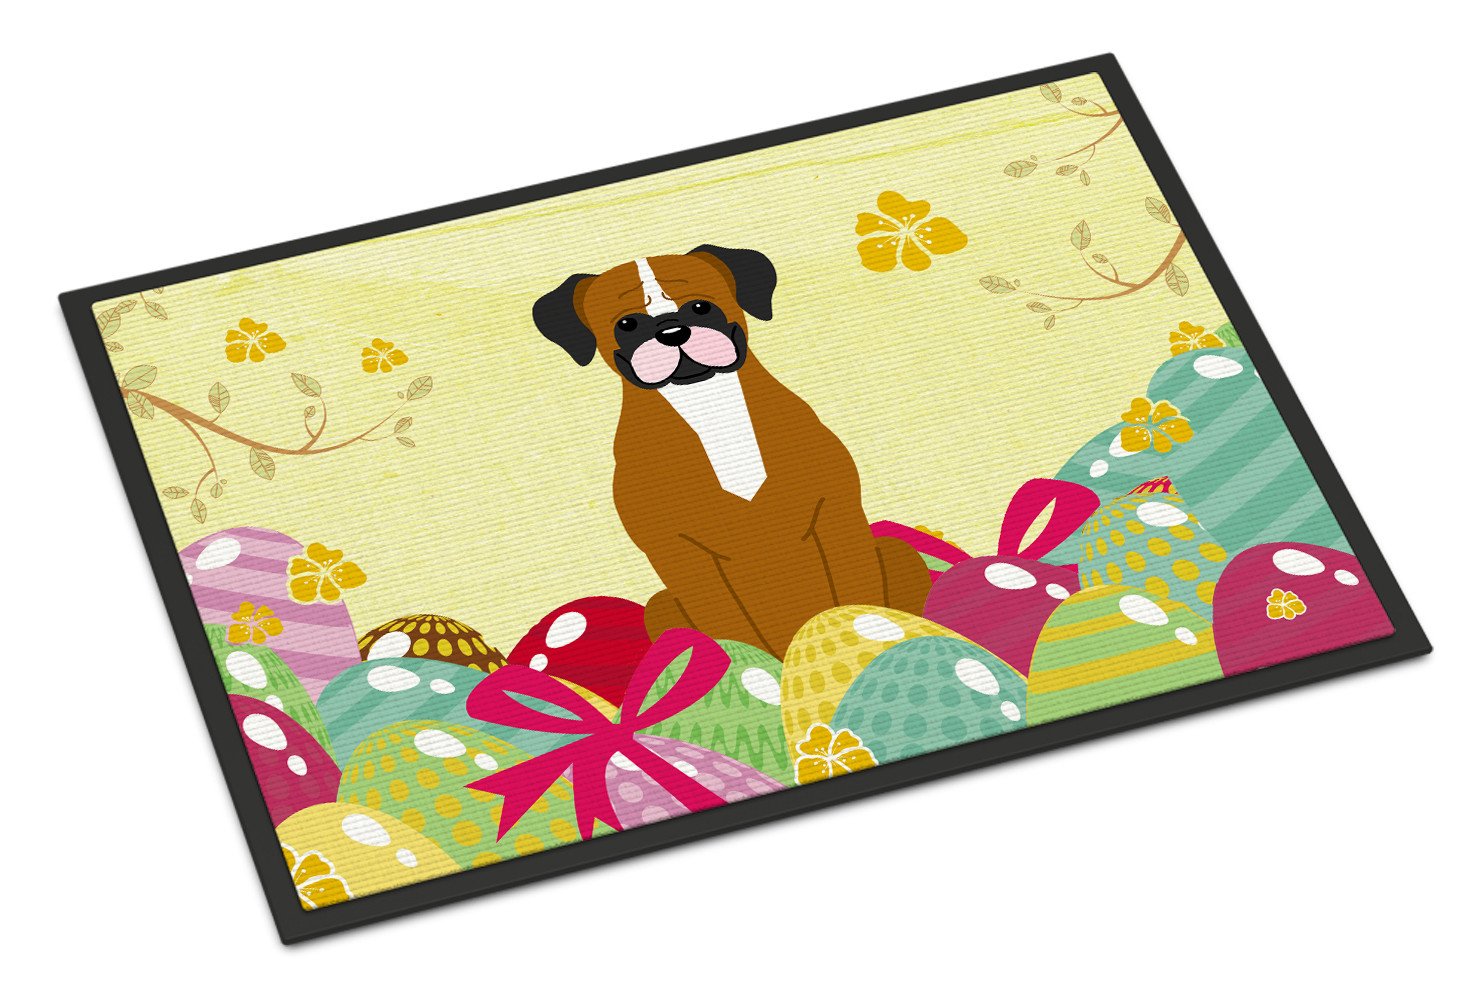 Easter Eggs Flashy Fawn Boxer Indoor or Outdoor Mat 24x36 BB6116JMAT by Caroline's Treasures